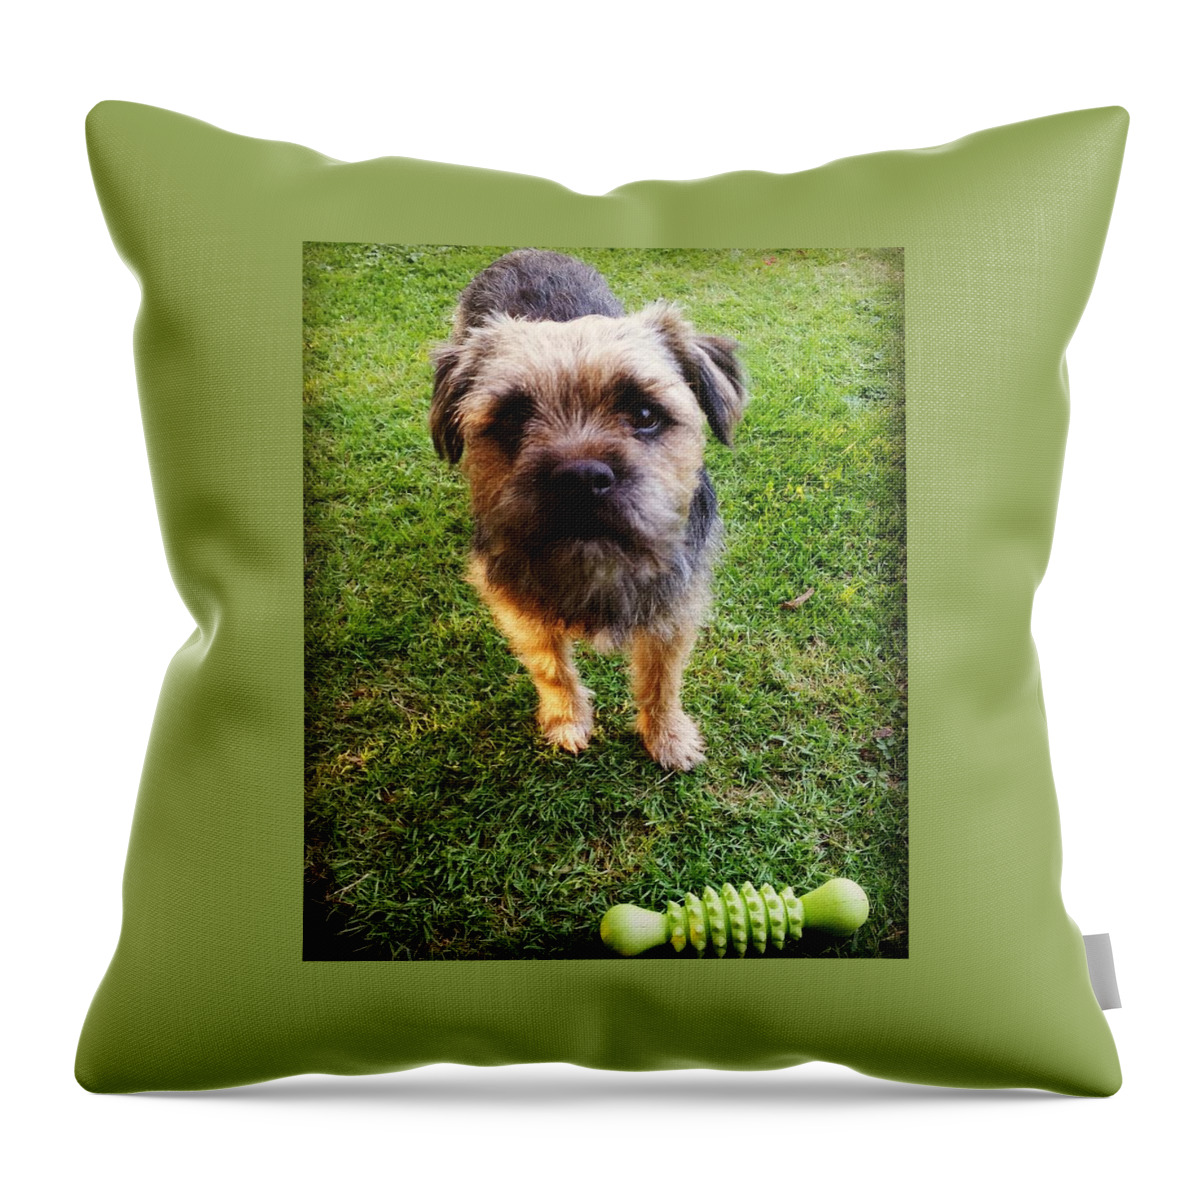 Dog Throw Pillow featuring the photograph Wanna Play by Rowena Tutty